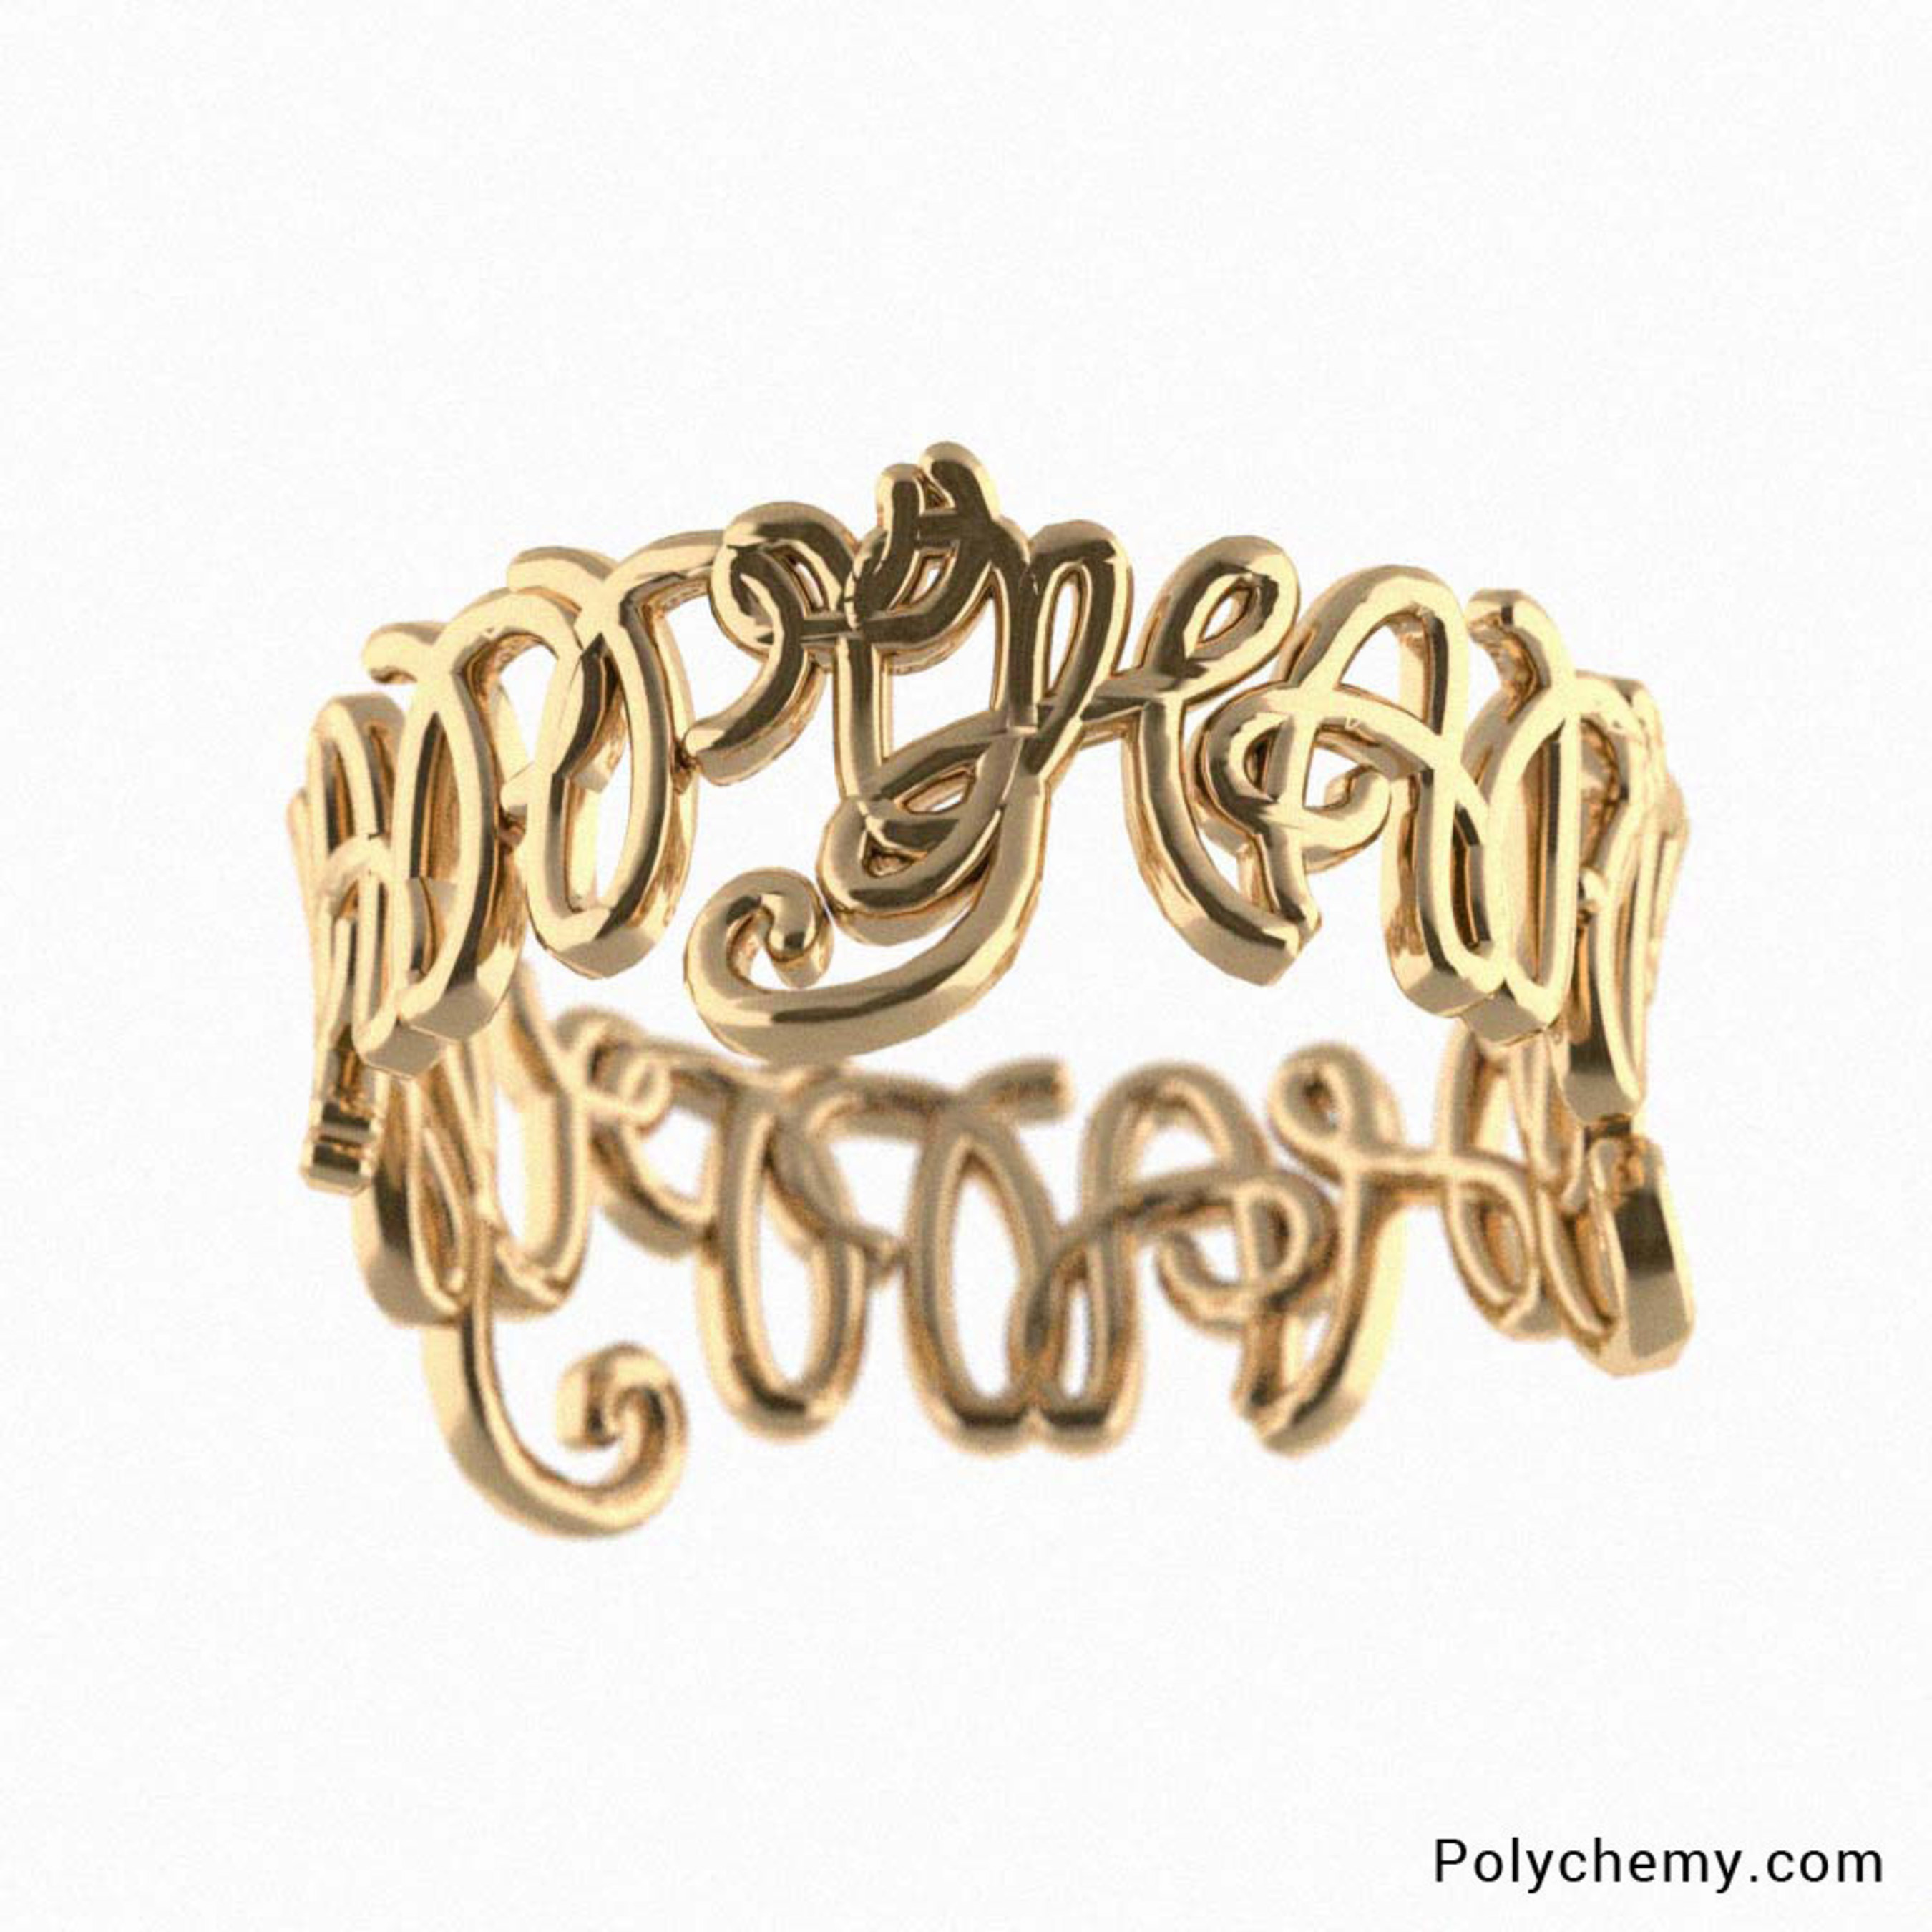 Polychemy's Cursive Name Ring In Gold. Polychemy's Cursive ring uses your name and creates an abstract cursive Design.